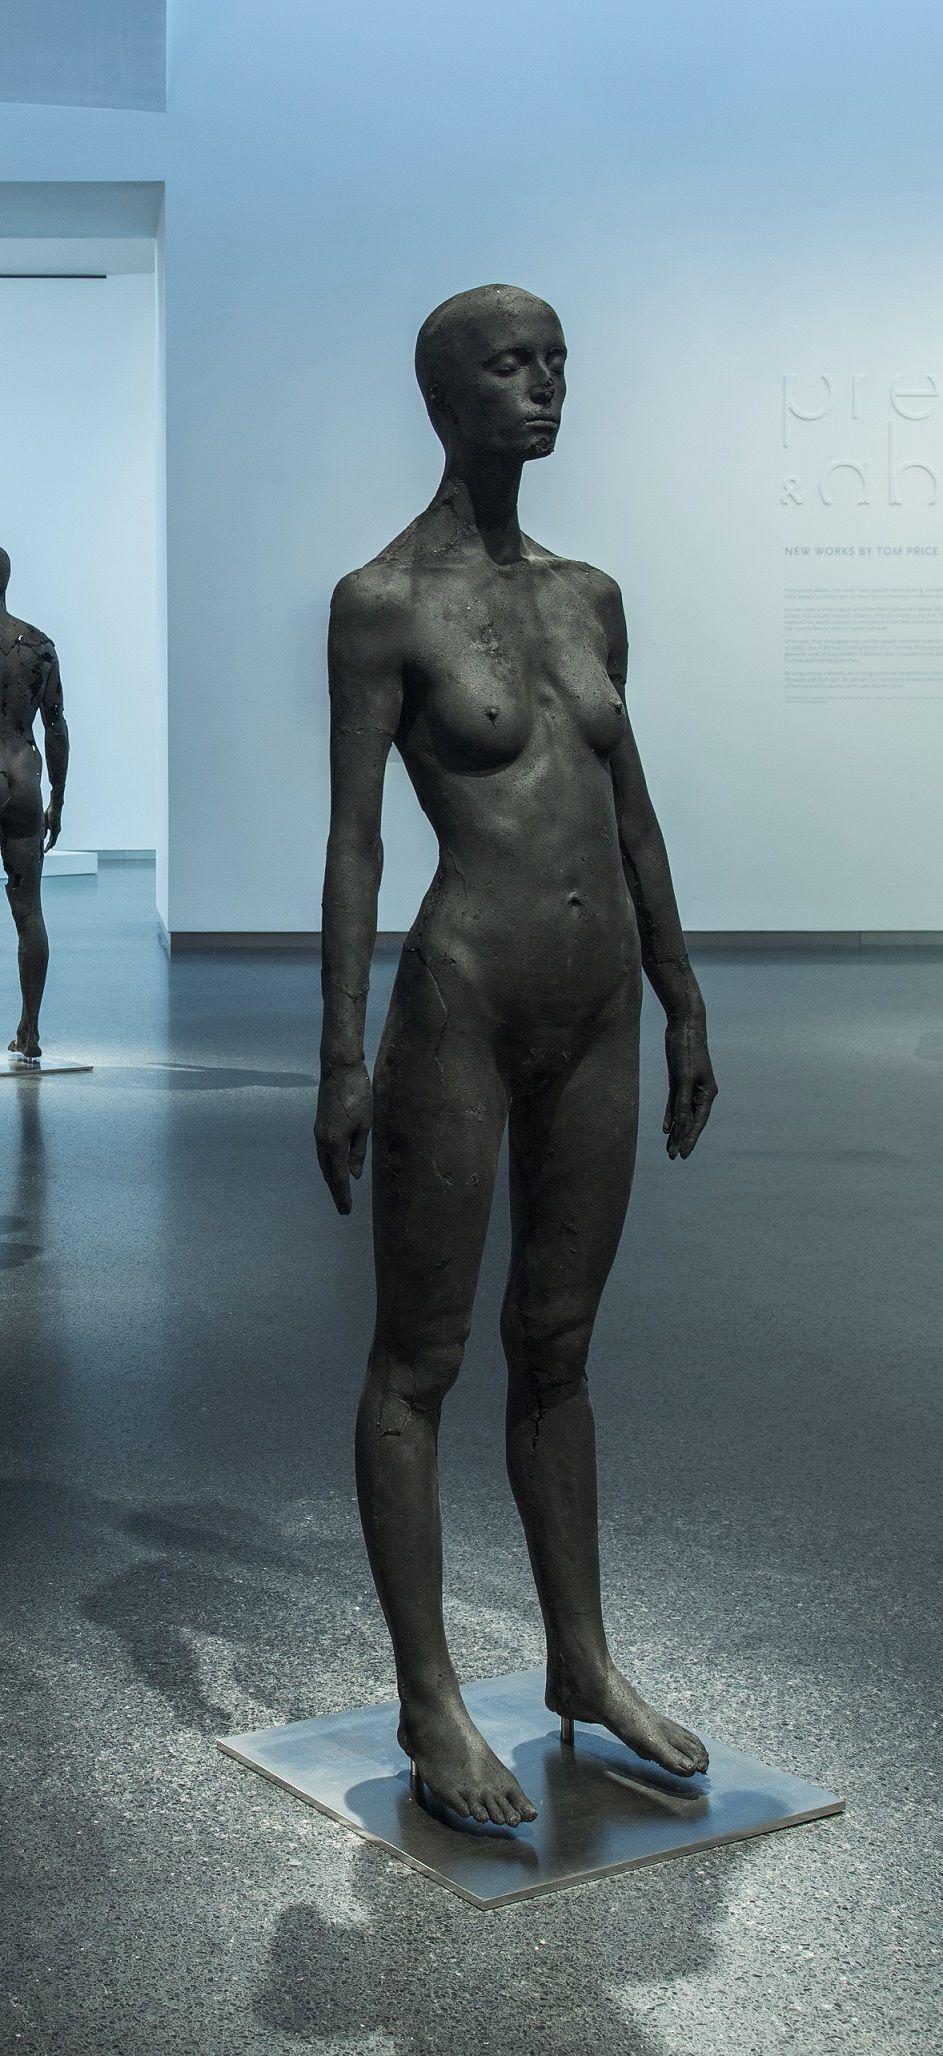 The Presence of Absence – Female (I) is a unique coal, stainless steel and epoxy resin sculpture by contemporary artist Tom Price, dimensions are 170 × 50 × 50 cm (66.9 × 19.7 × 19.7 in). 
The sculpture is signed and comes with a certificate of